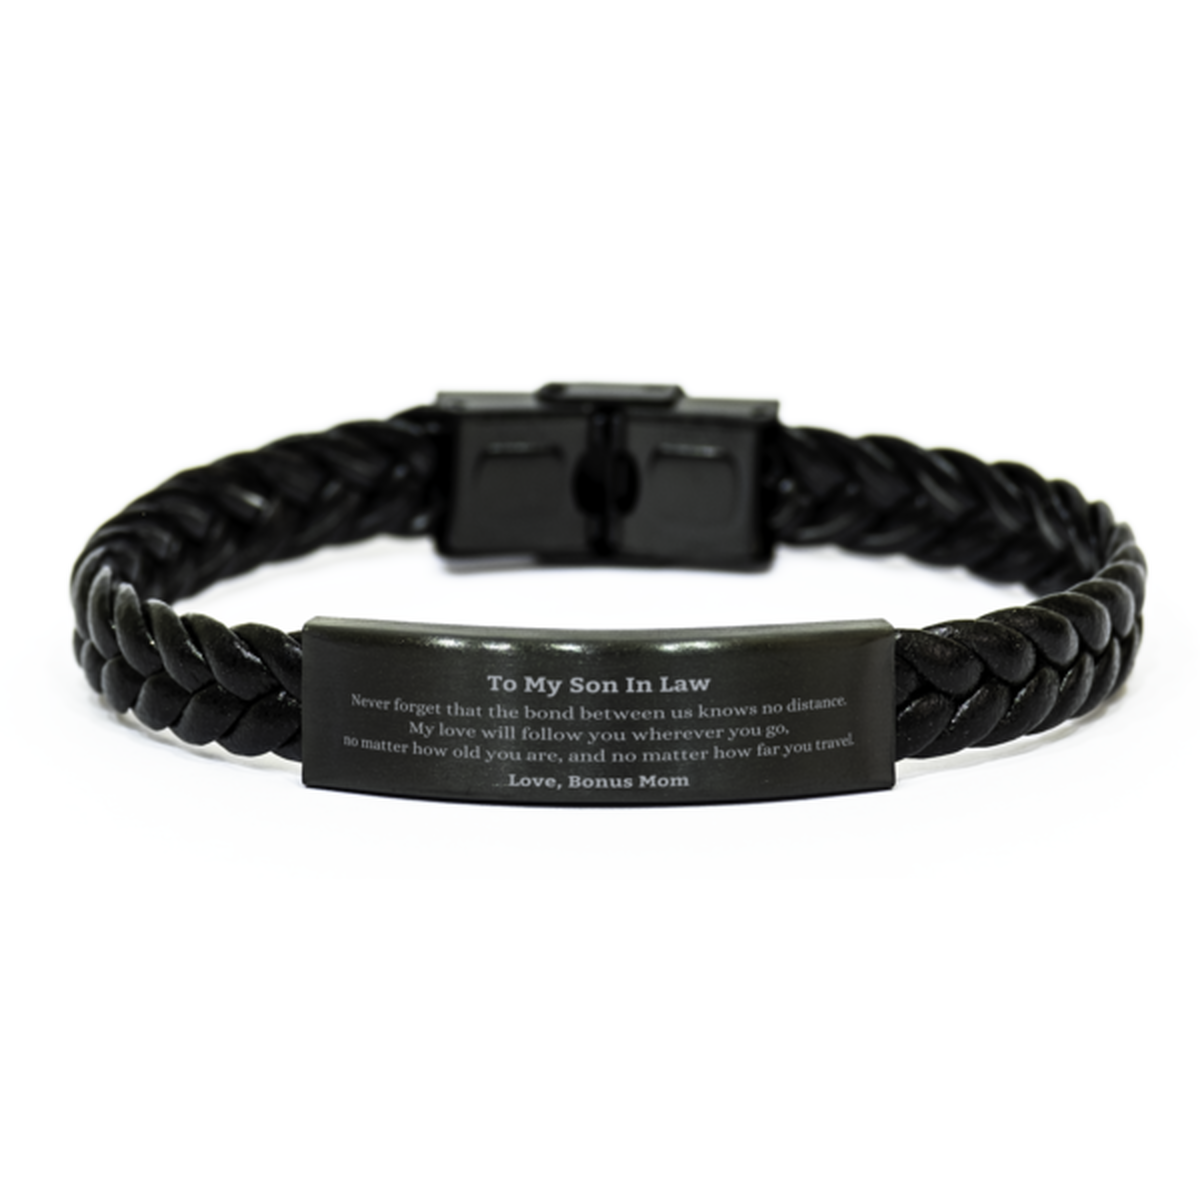 Son In Law Birthday Gifts from Bonus Mom, Adjustable Braided Leather Bracelet for Son In Law Christmas Graduation Unique Gifts Son In Law Never forget that the bond between us knows no distance. Love, Bonus Mom